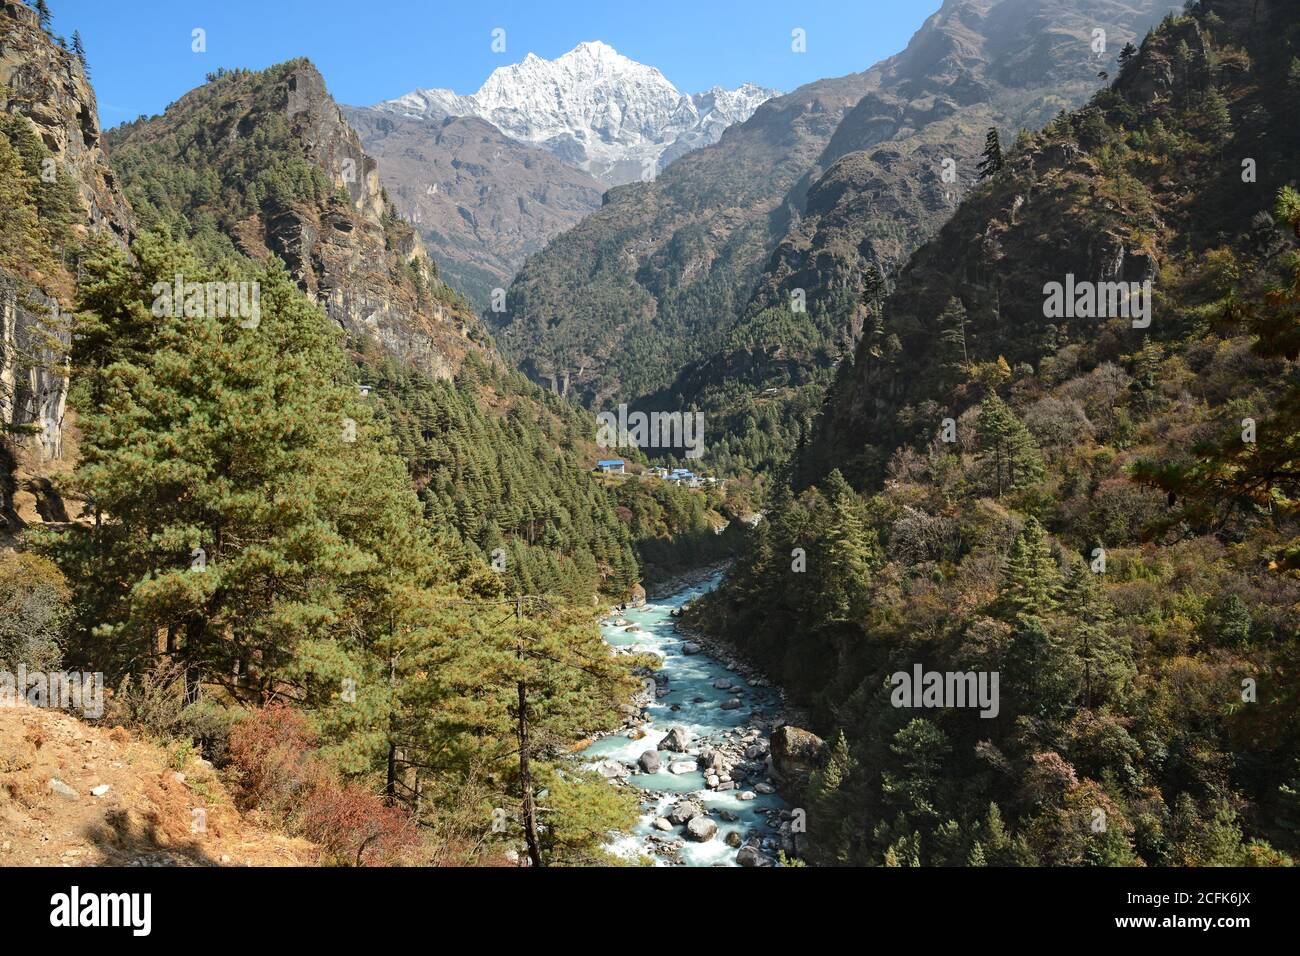 The first view of Thamserku while hiking along the Dudh Koshi river in Nepal. Stock Photo